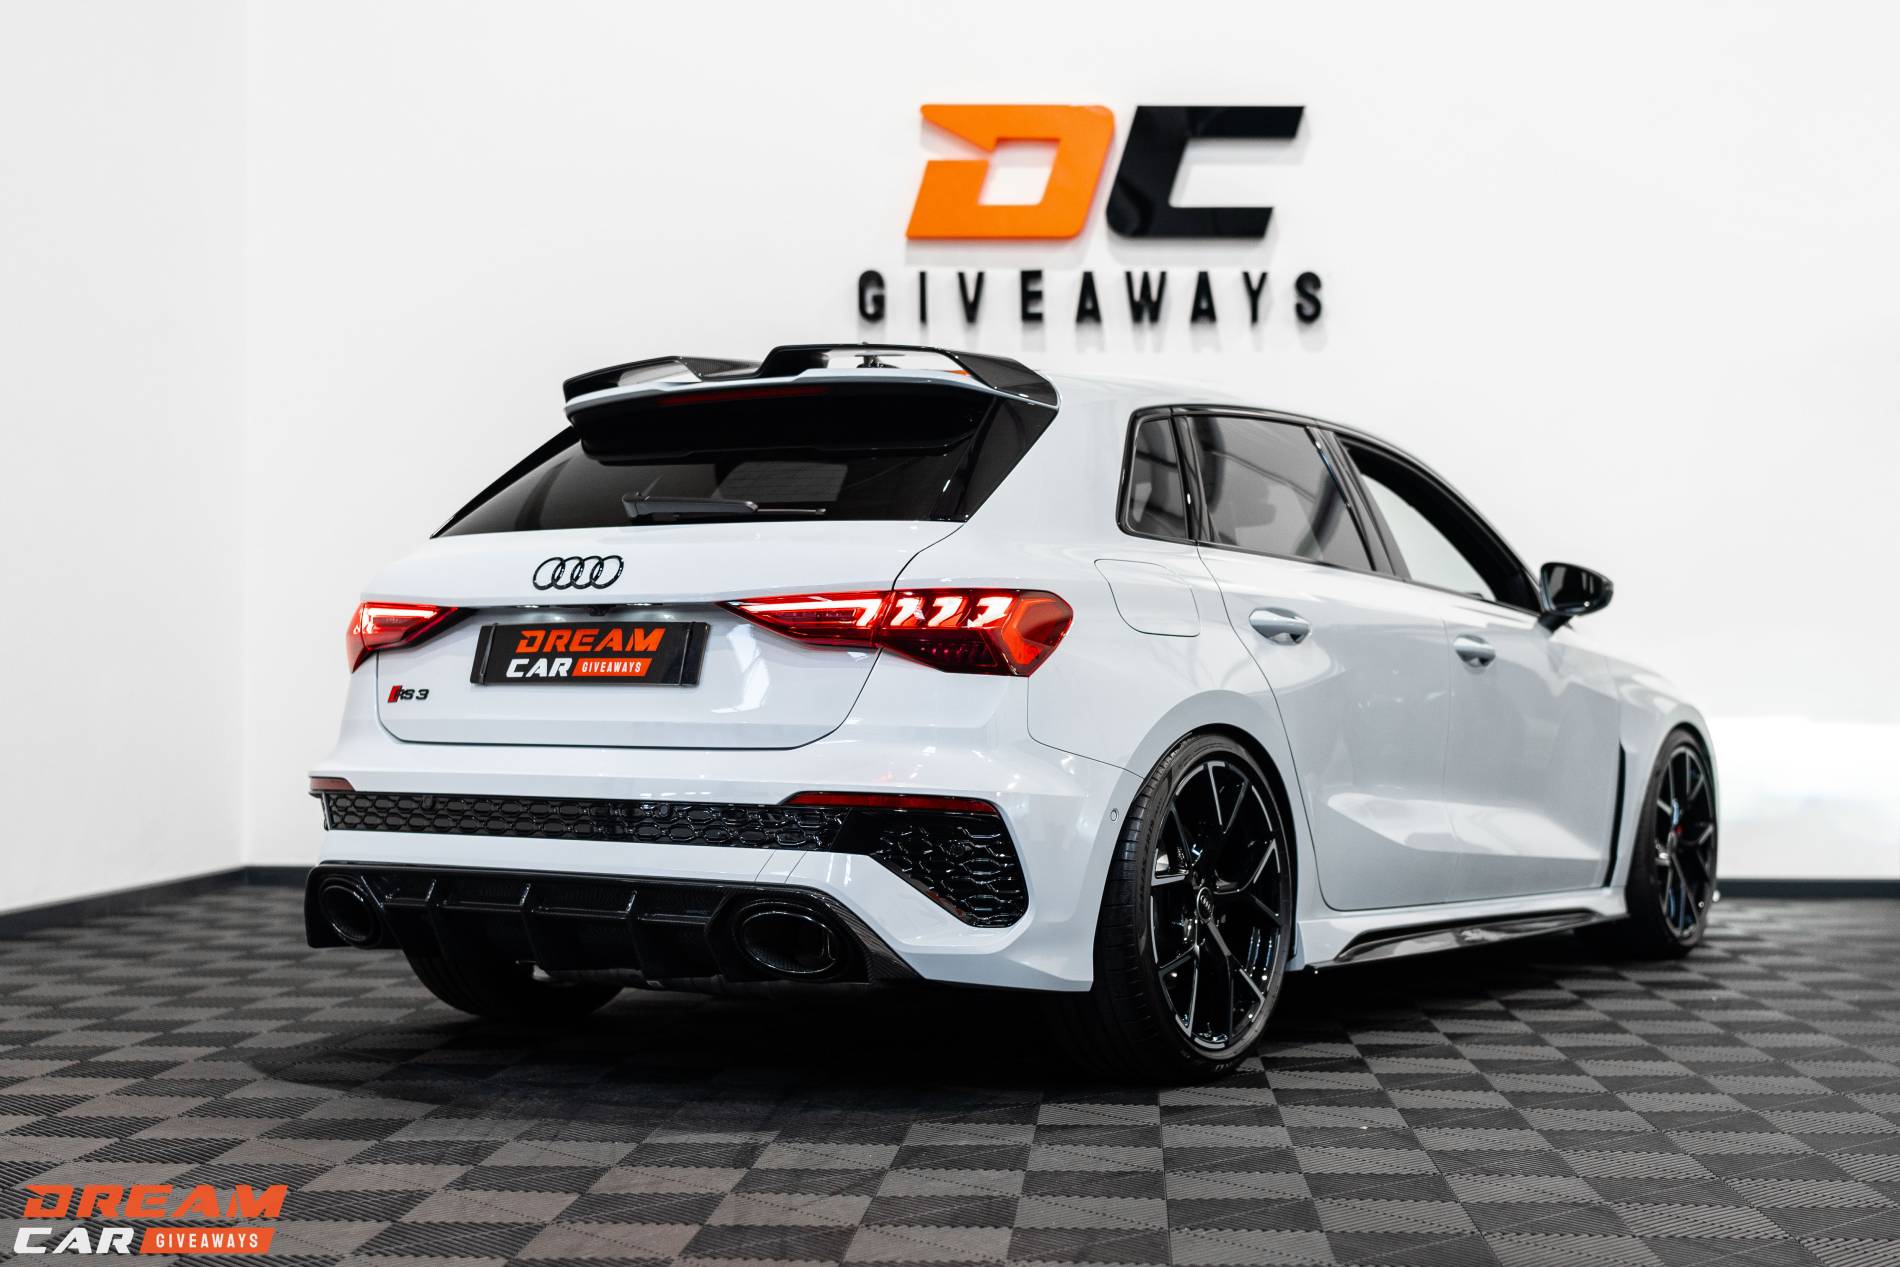 Win this Brand New Audi RS3 & £1,000 or £59,000 Tax Free